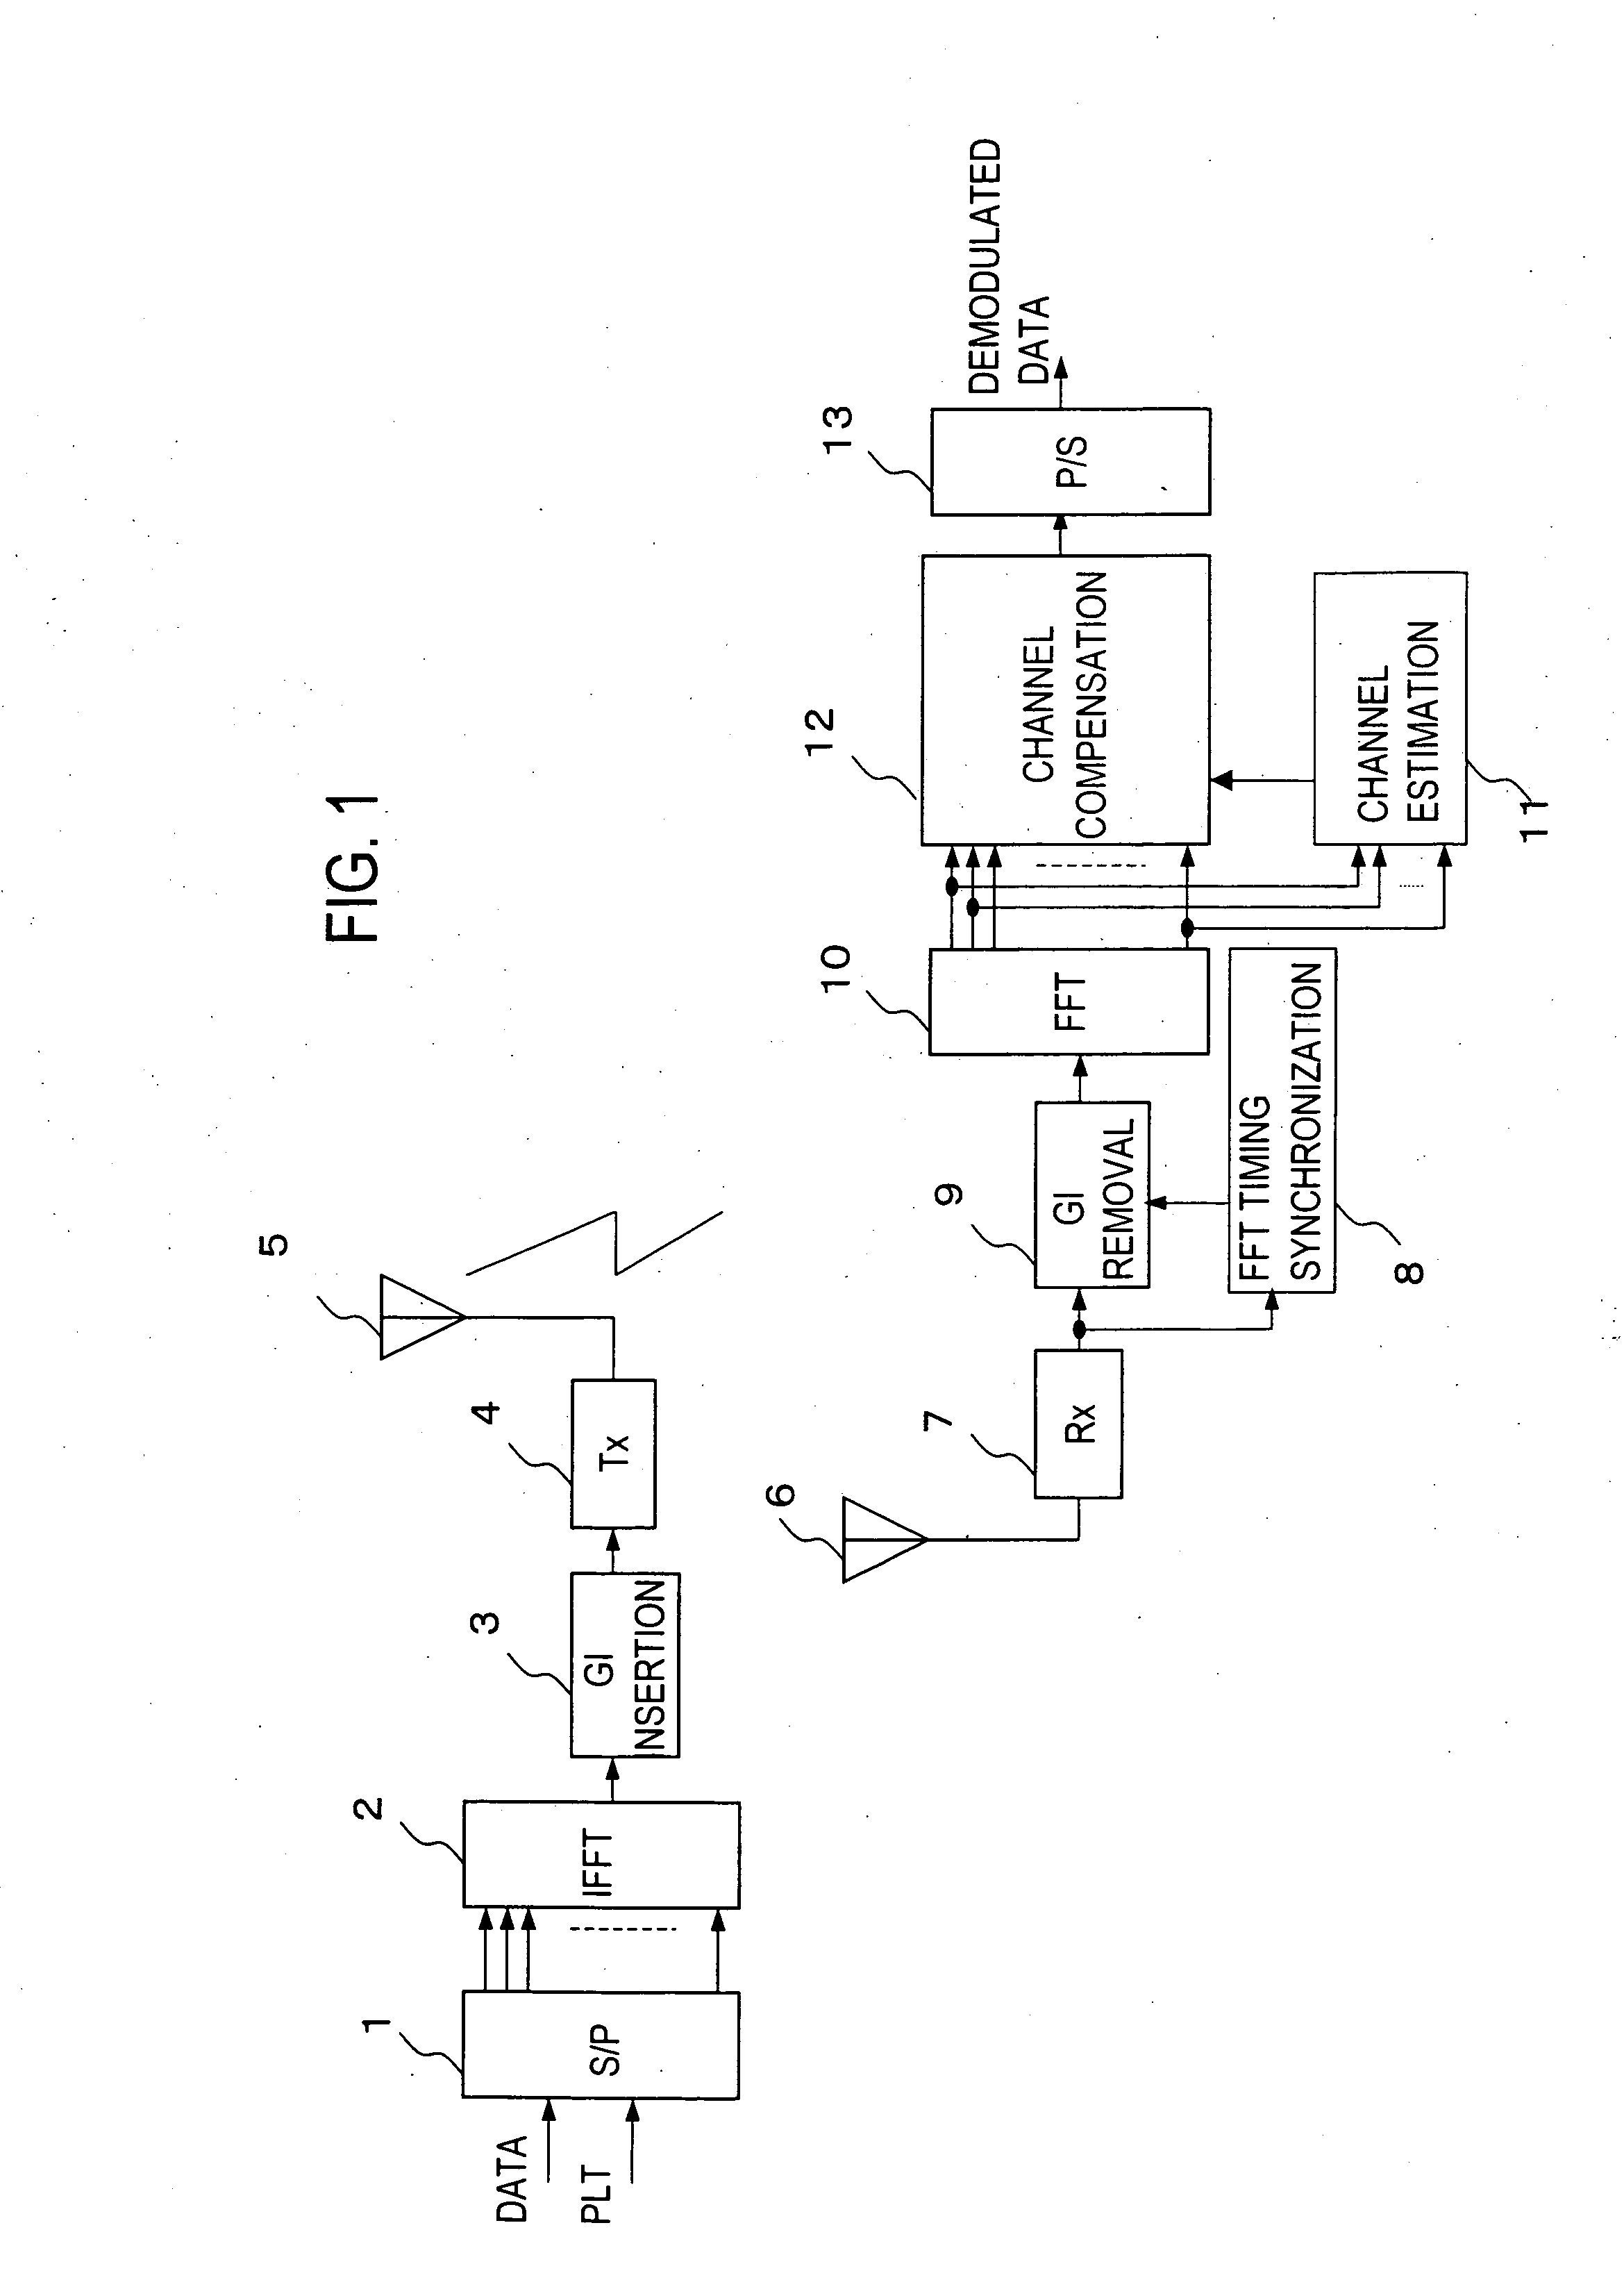 Receiver for orthogonal frequency division multiplexing transmission